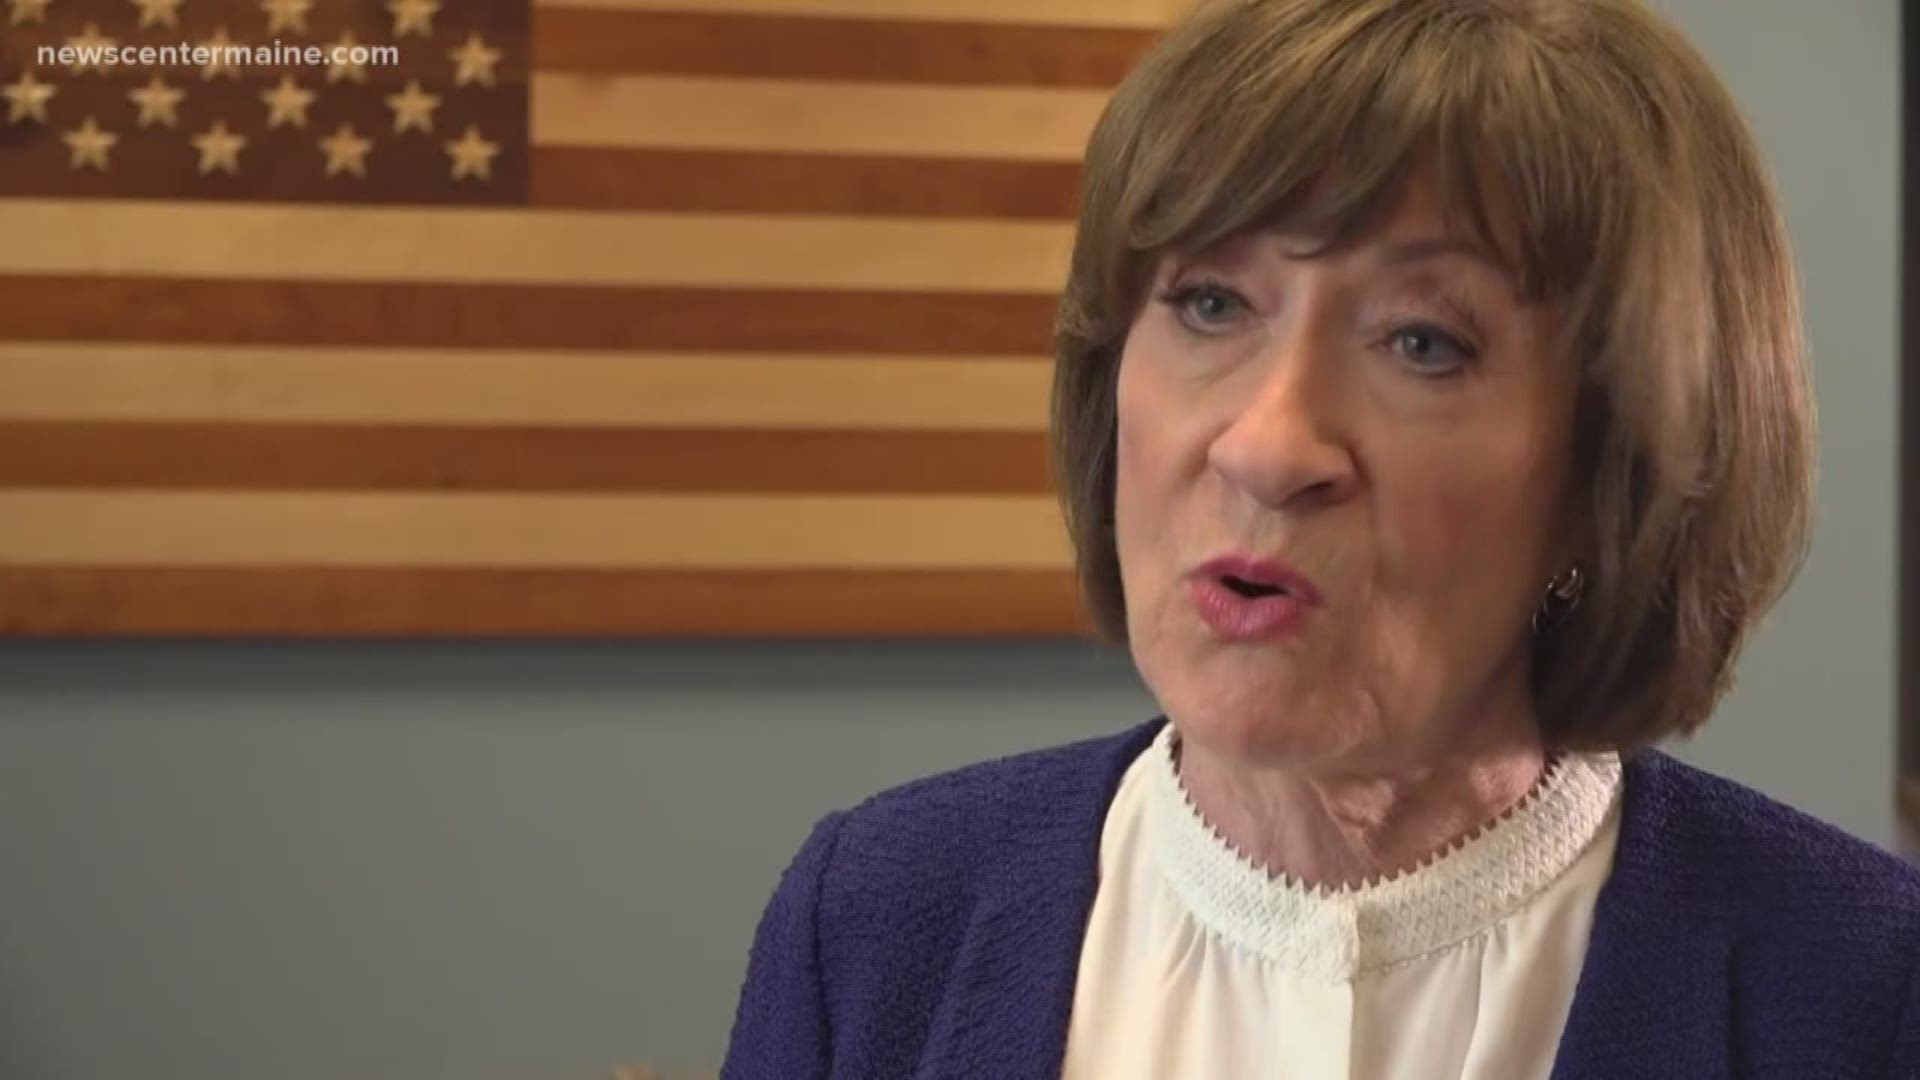 Senator Susan Collins spoke to NEWS CENTER Maine immediately after she cast her vote to confirm Judge